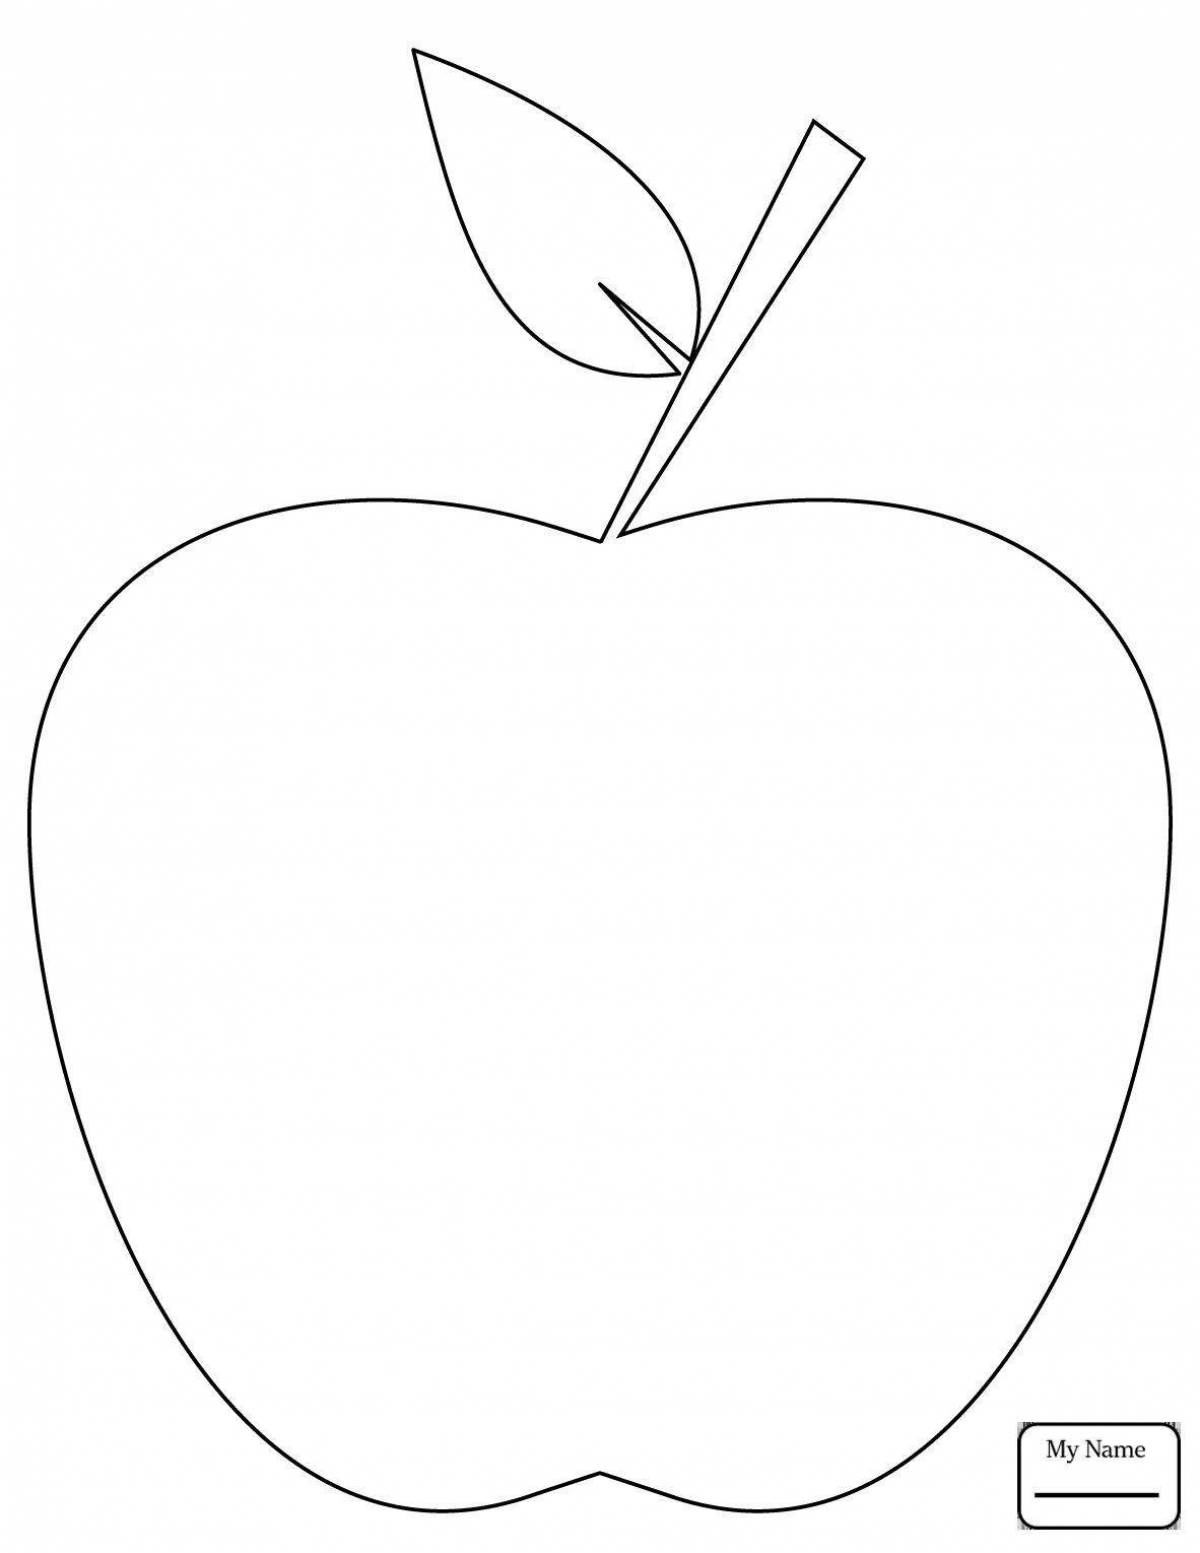 Attractive apple pattern coloring page